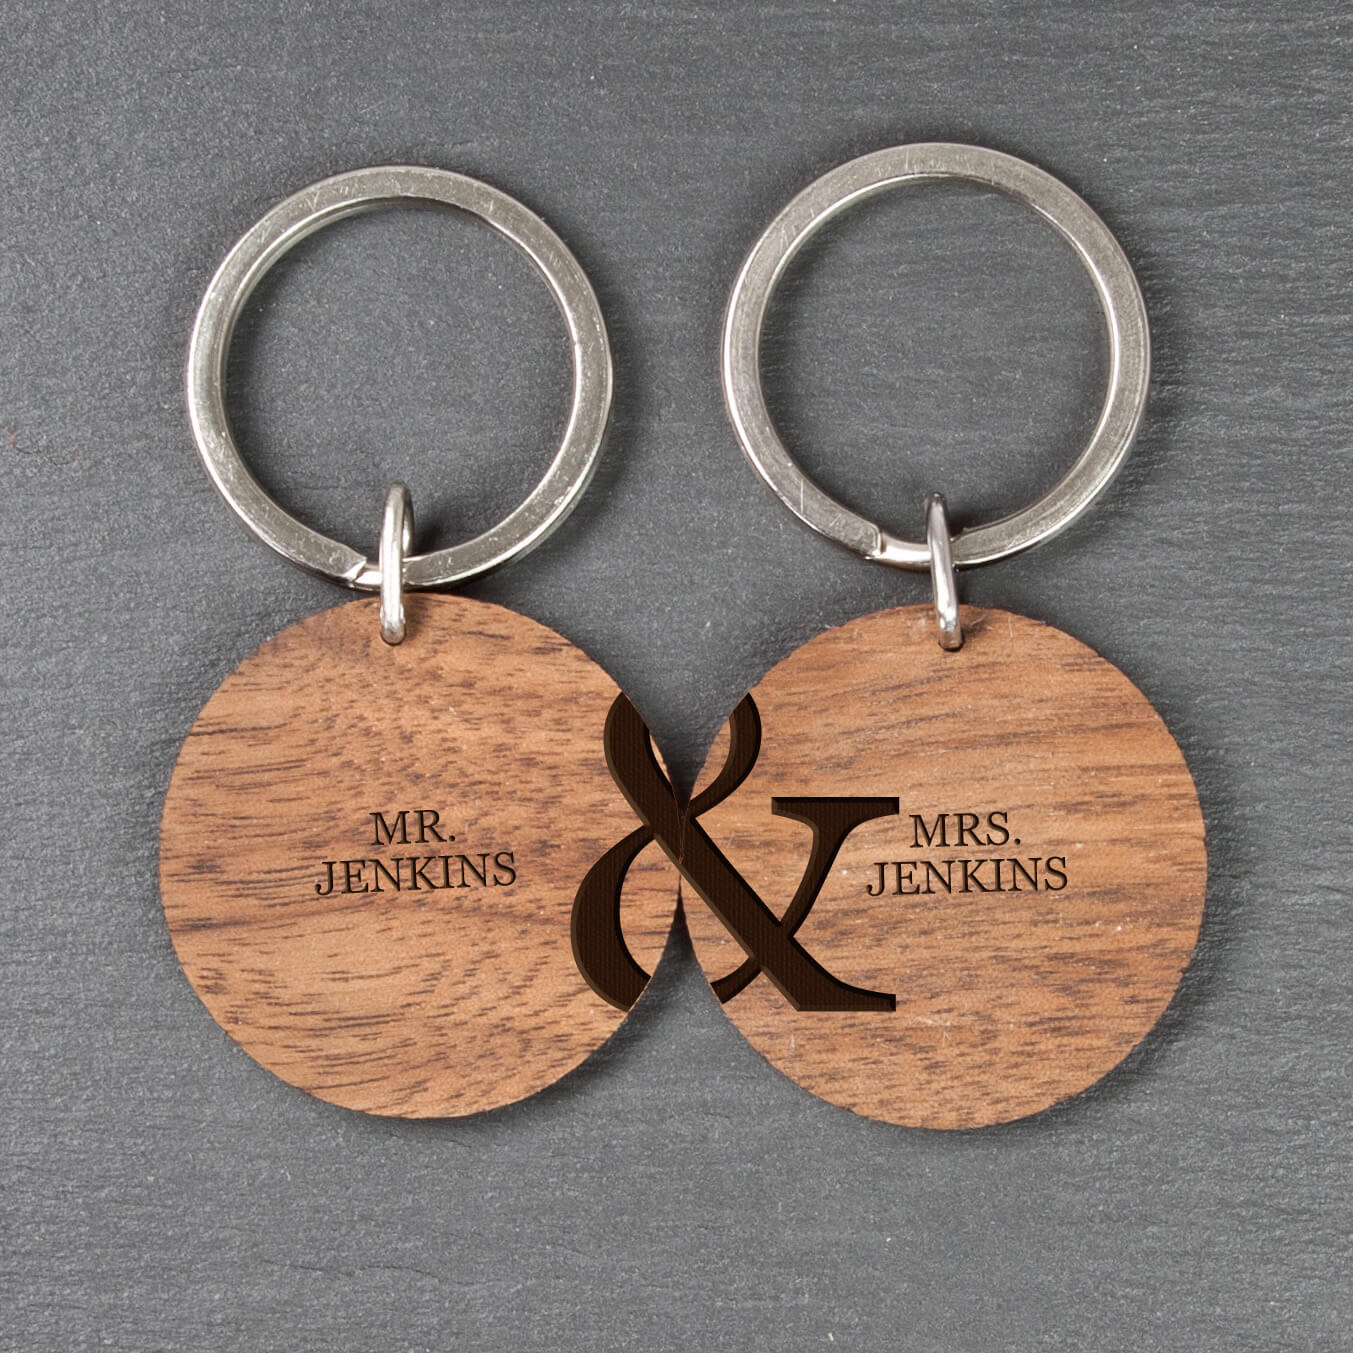 Personalised Wooden Key Ring – Couples Set of 2